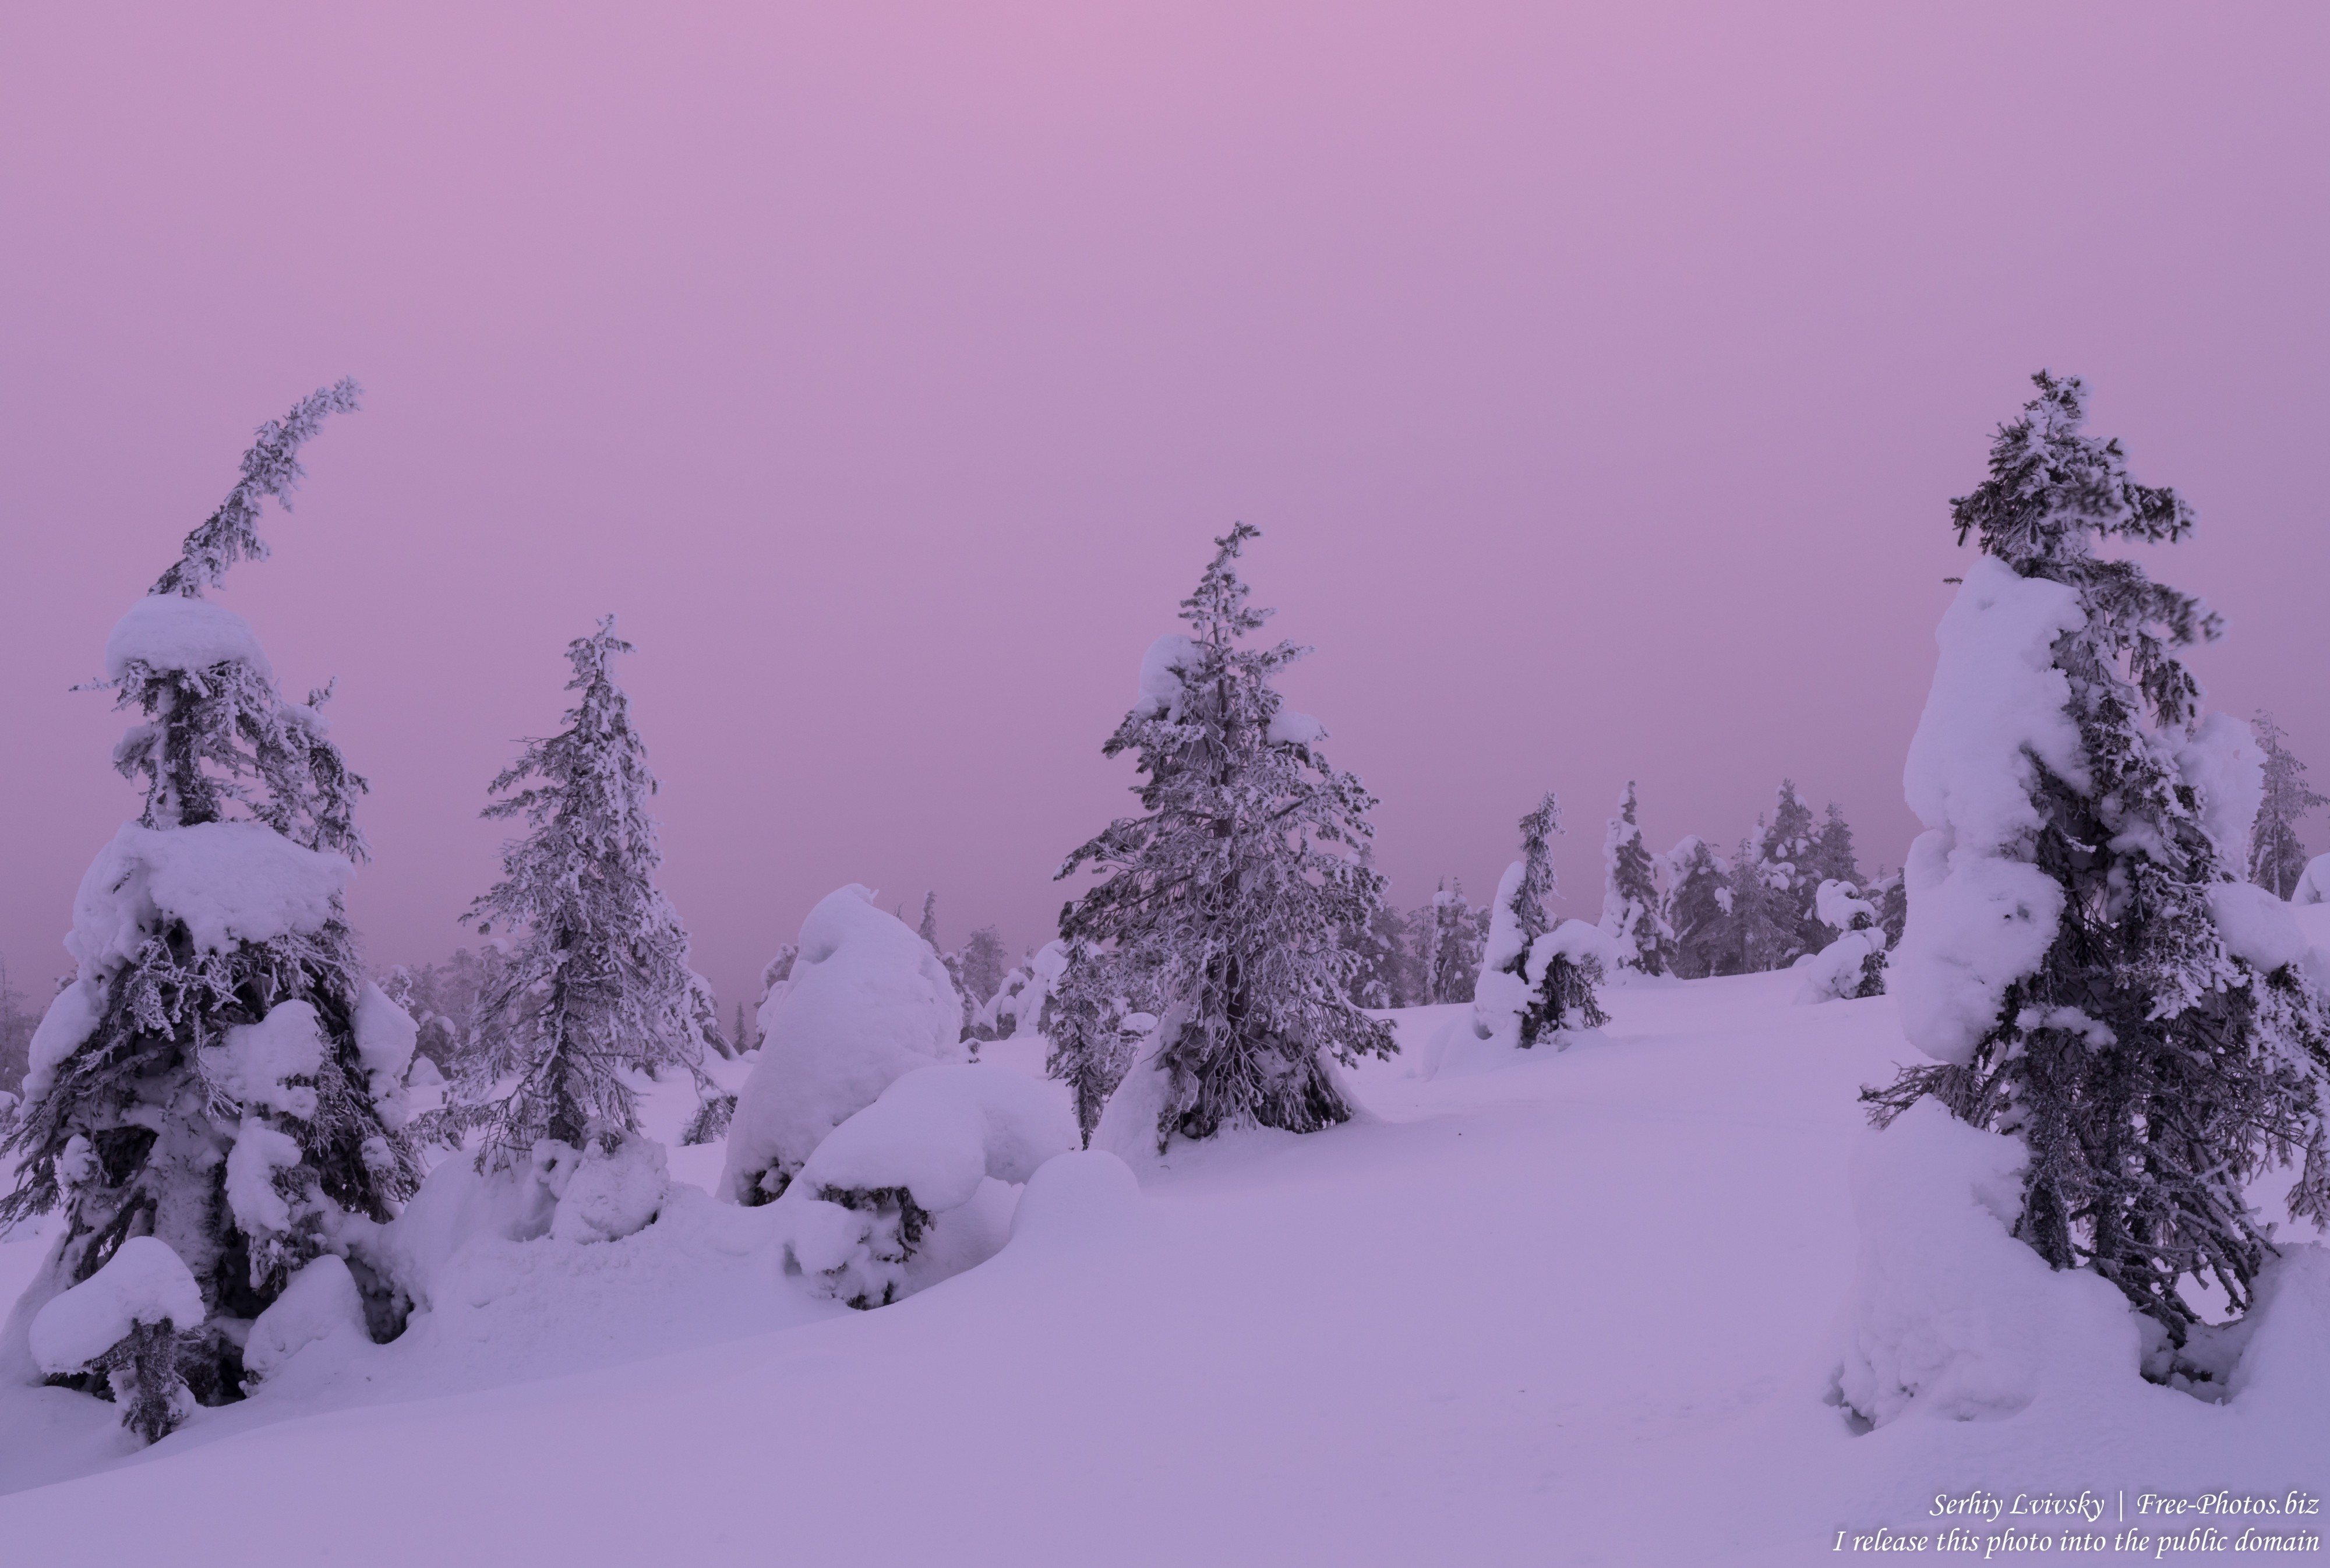 Riisitunturi, Finland, photographed in January 2020 by Serhiy Lvivsky, picture 6